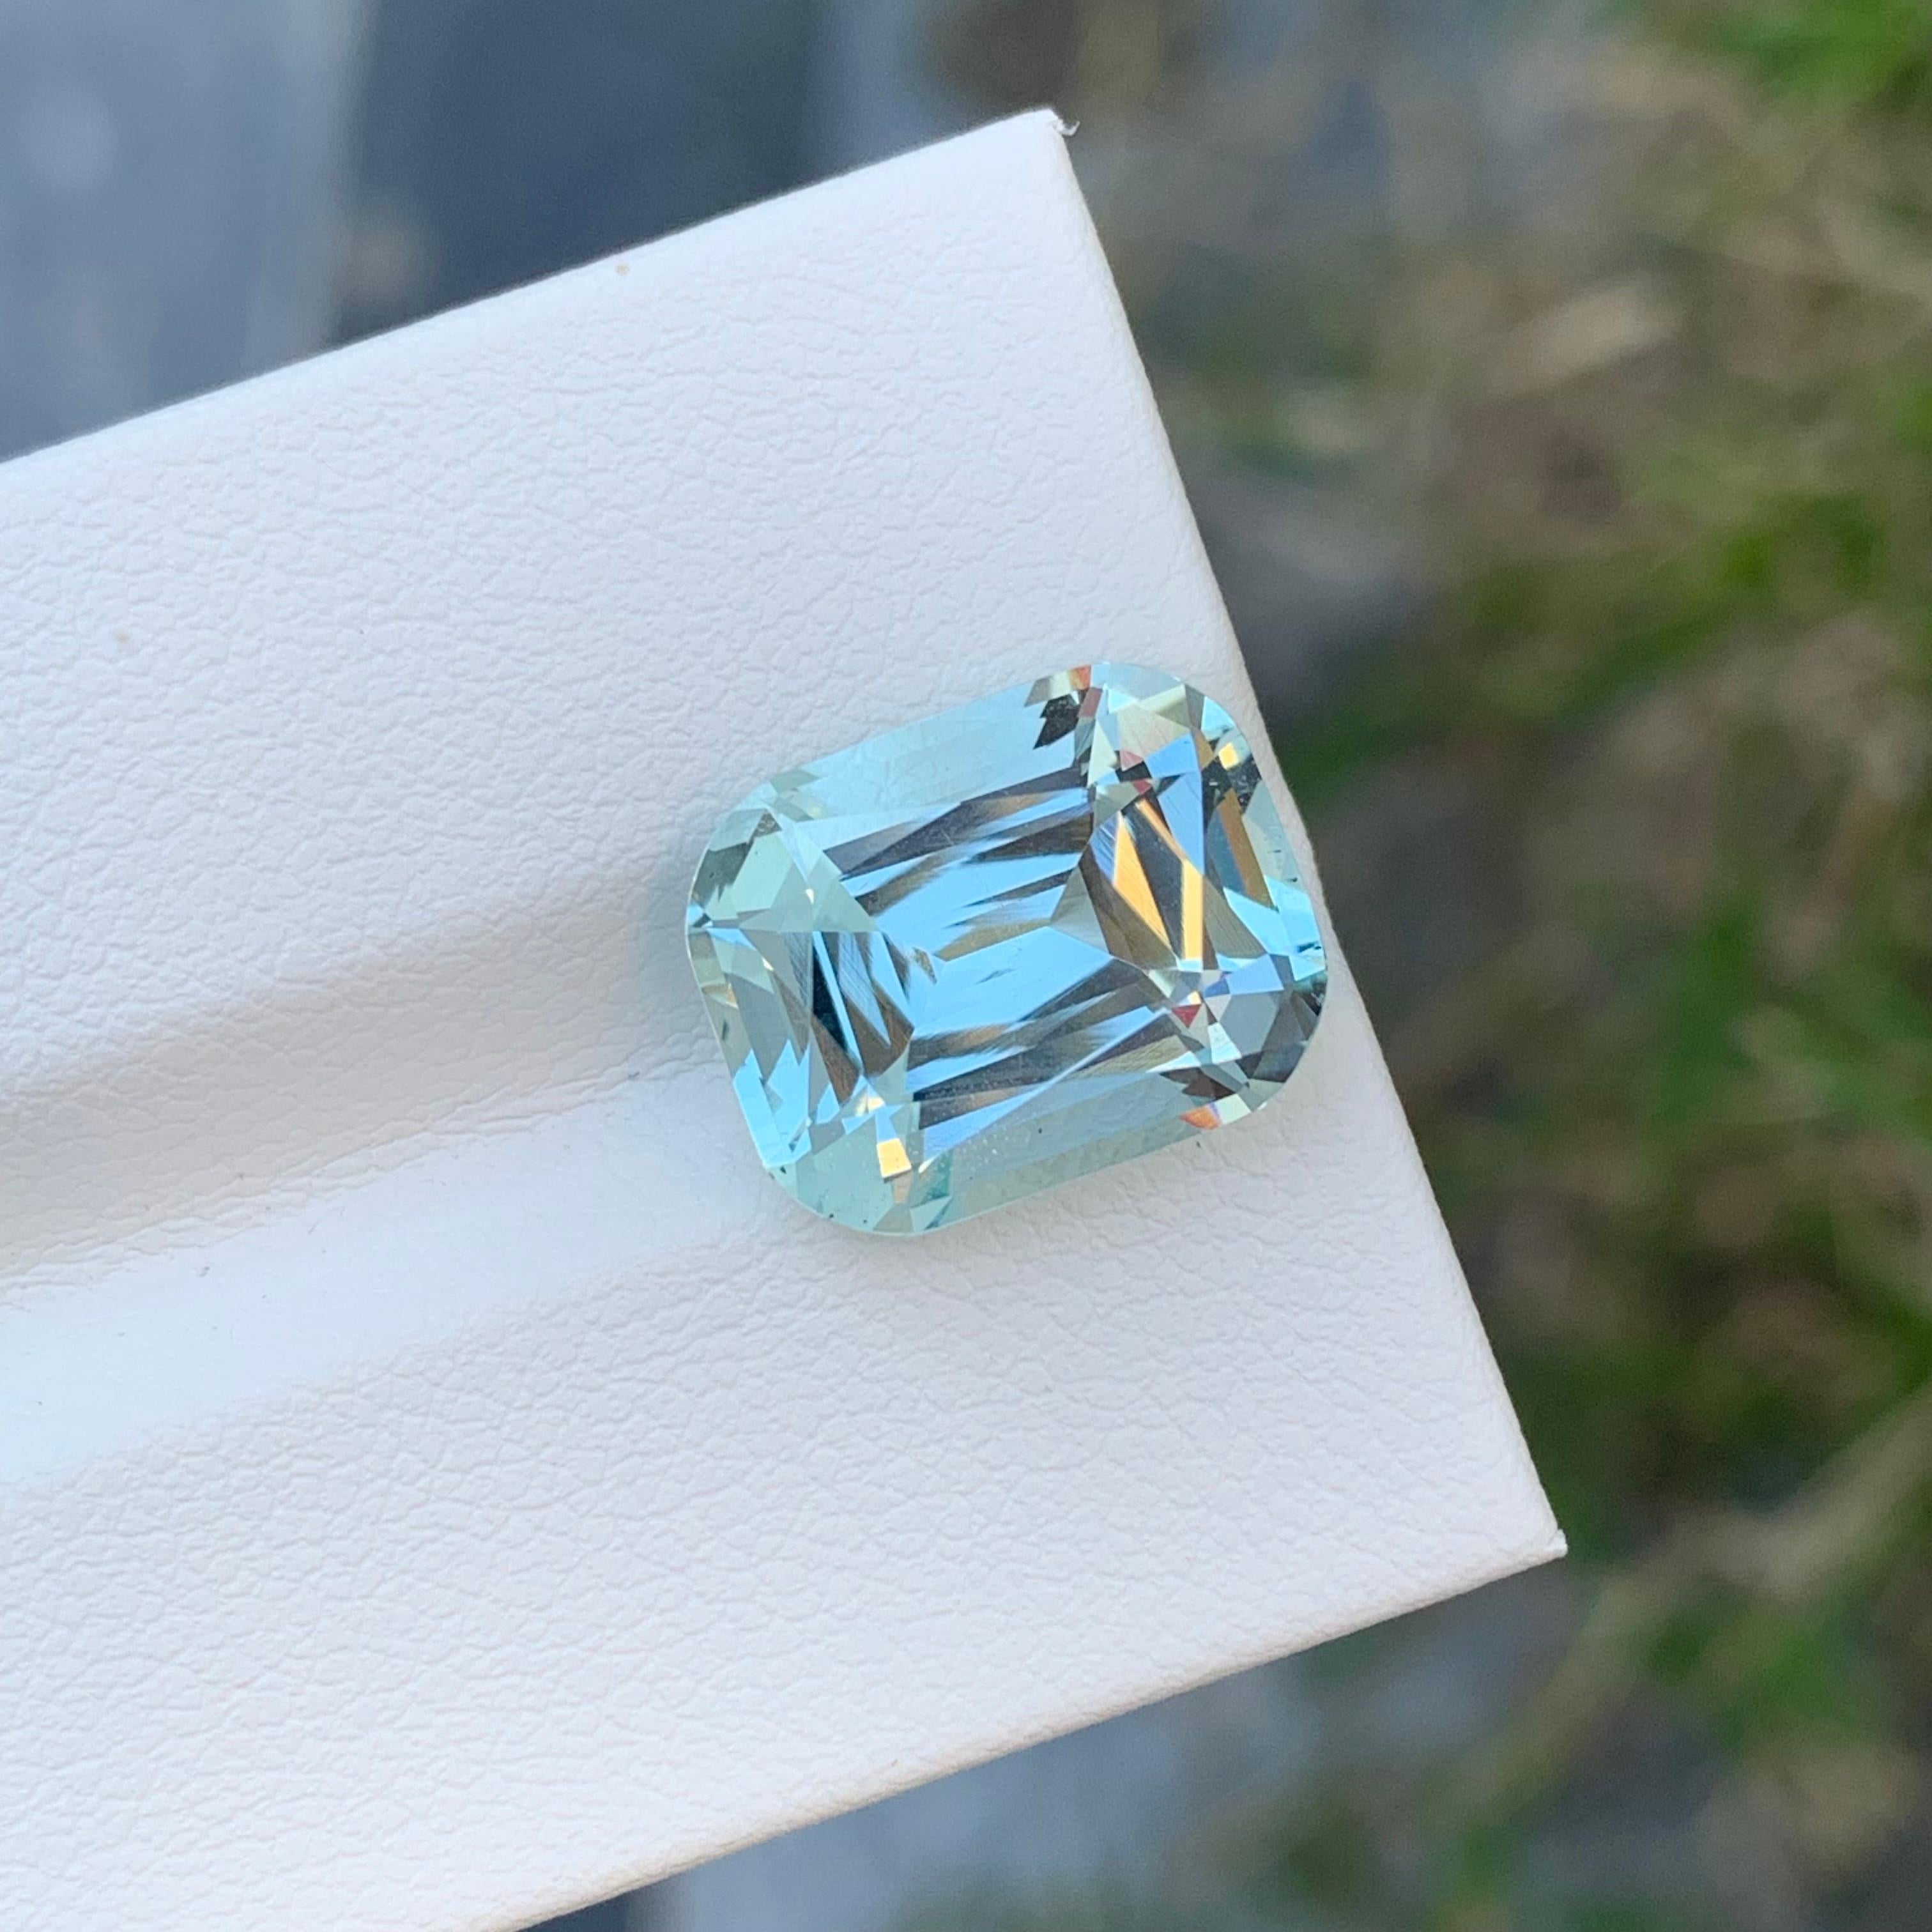 Loose Aquamarine
Weight: 6.30 Carat
Dimension: 13 x 10.4 x 7.5 Mm
Colour : Pale Blue
Origin: Shigar Valley, Pakistan
Treatment: Non
Certificate : On Demand
Shape: Cushion 

Aquamarine is a captivating gemstone known for its enchanting blue-green